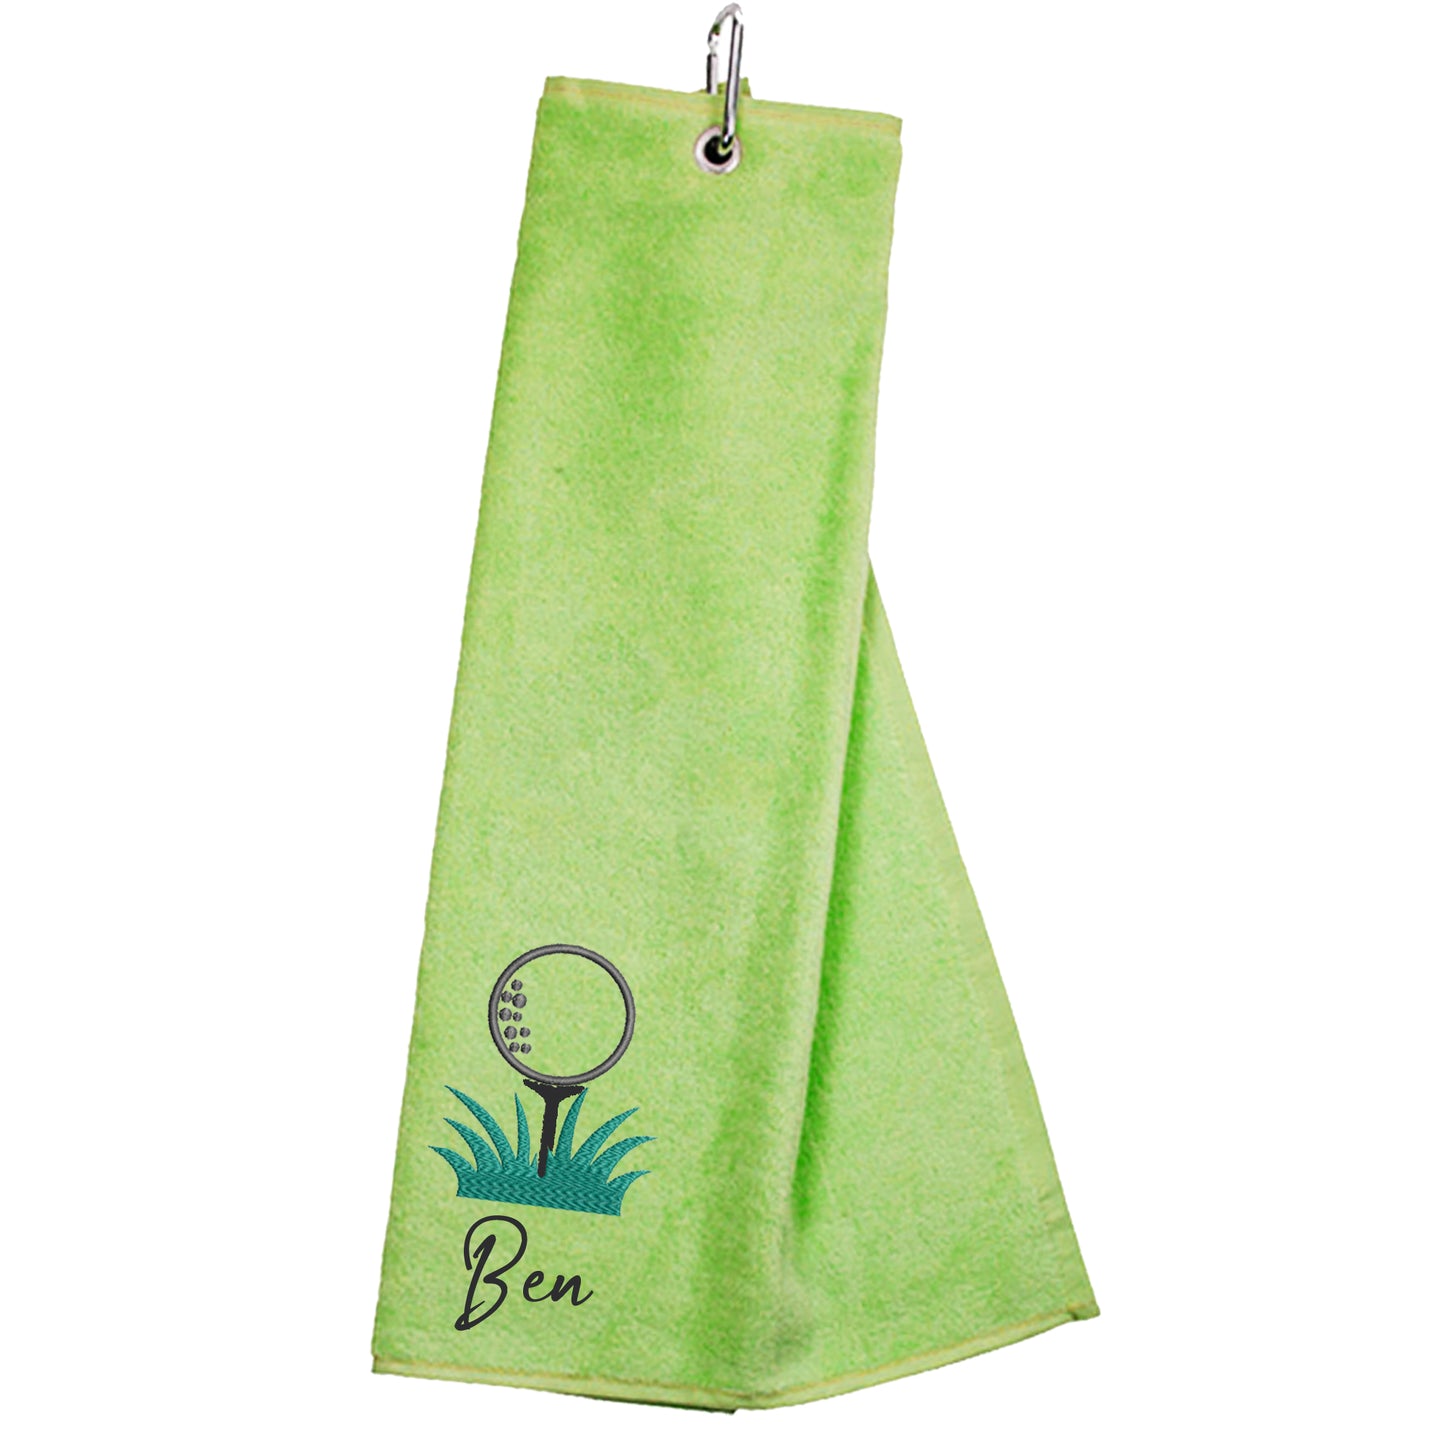 Personalised Embroidered Tri Fold GOLF Towel Trifold Towel with Carabiner Clip  - Always Looking Good -   